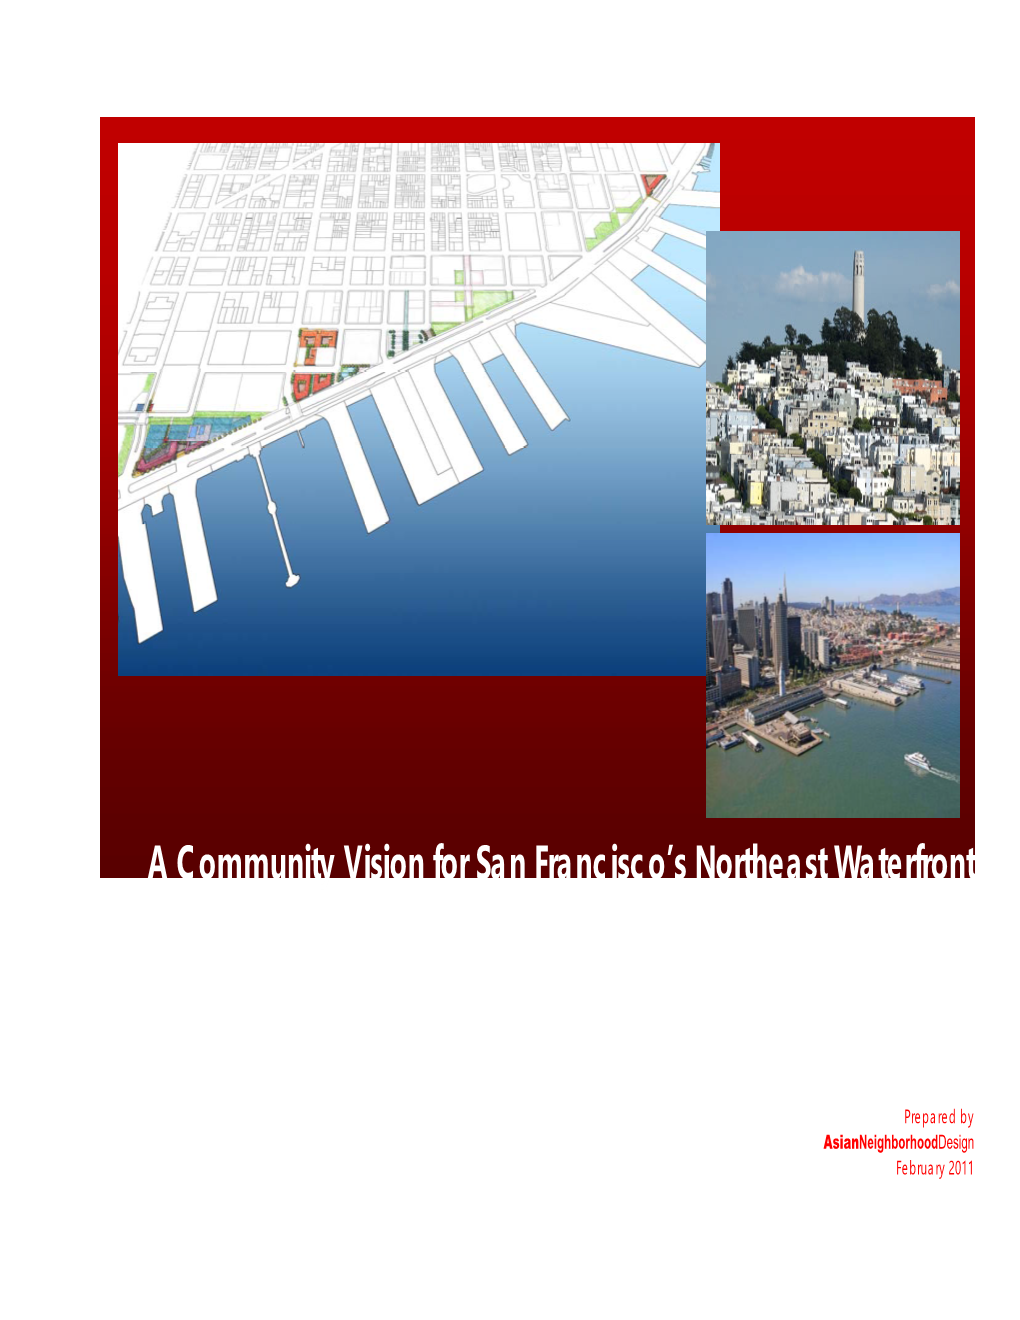 A Community Vision for San Francisco's Northeast Waterfront